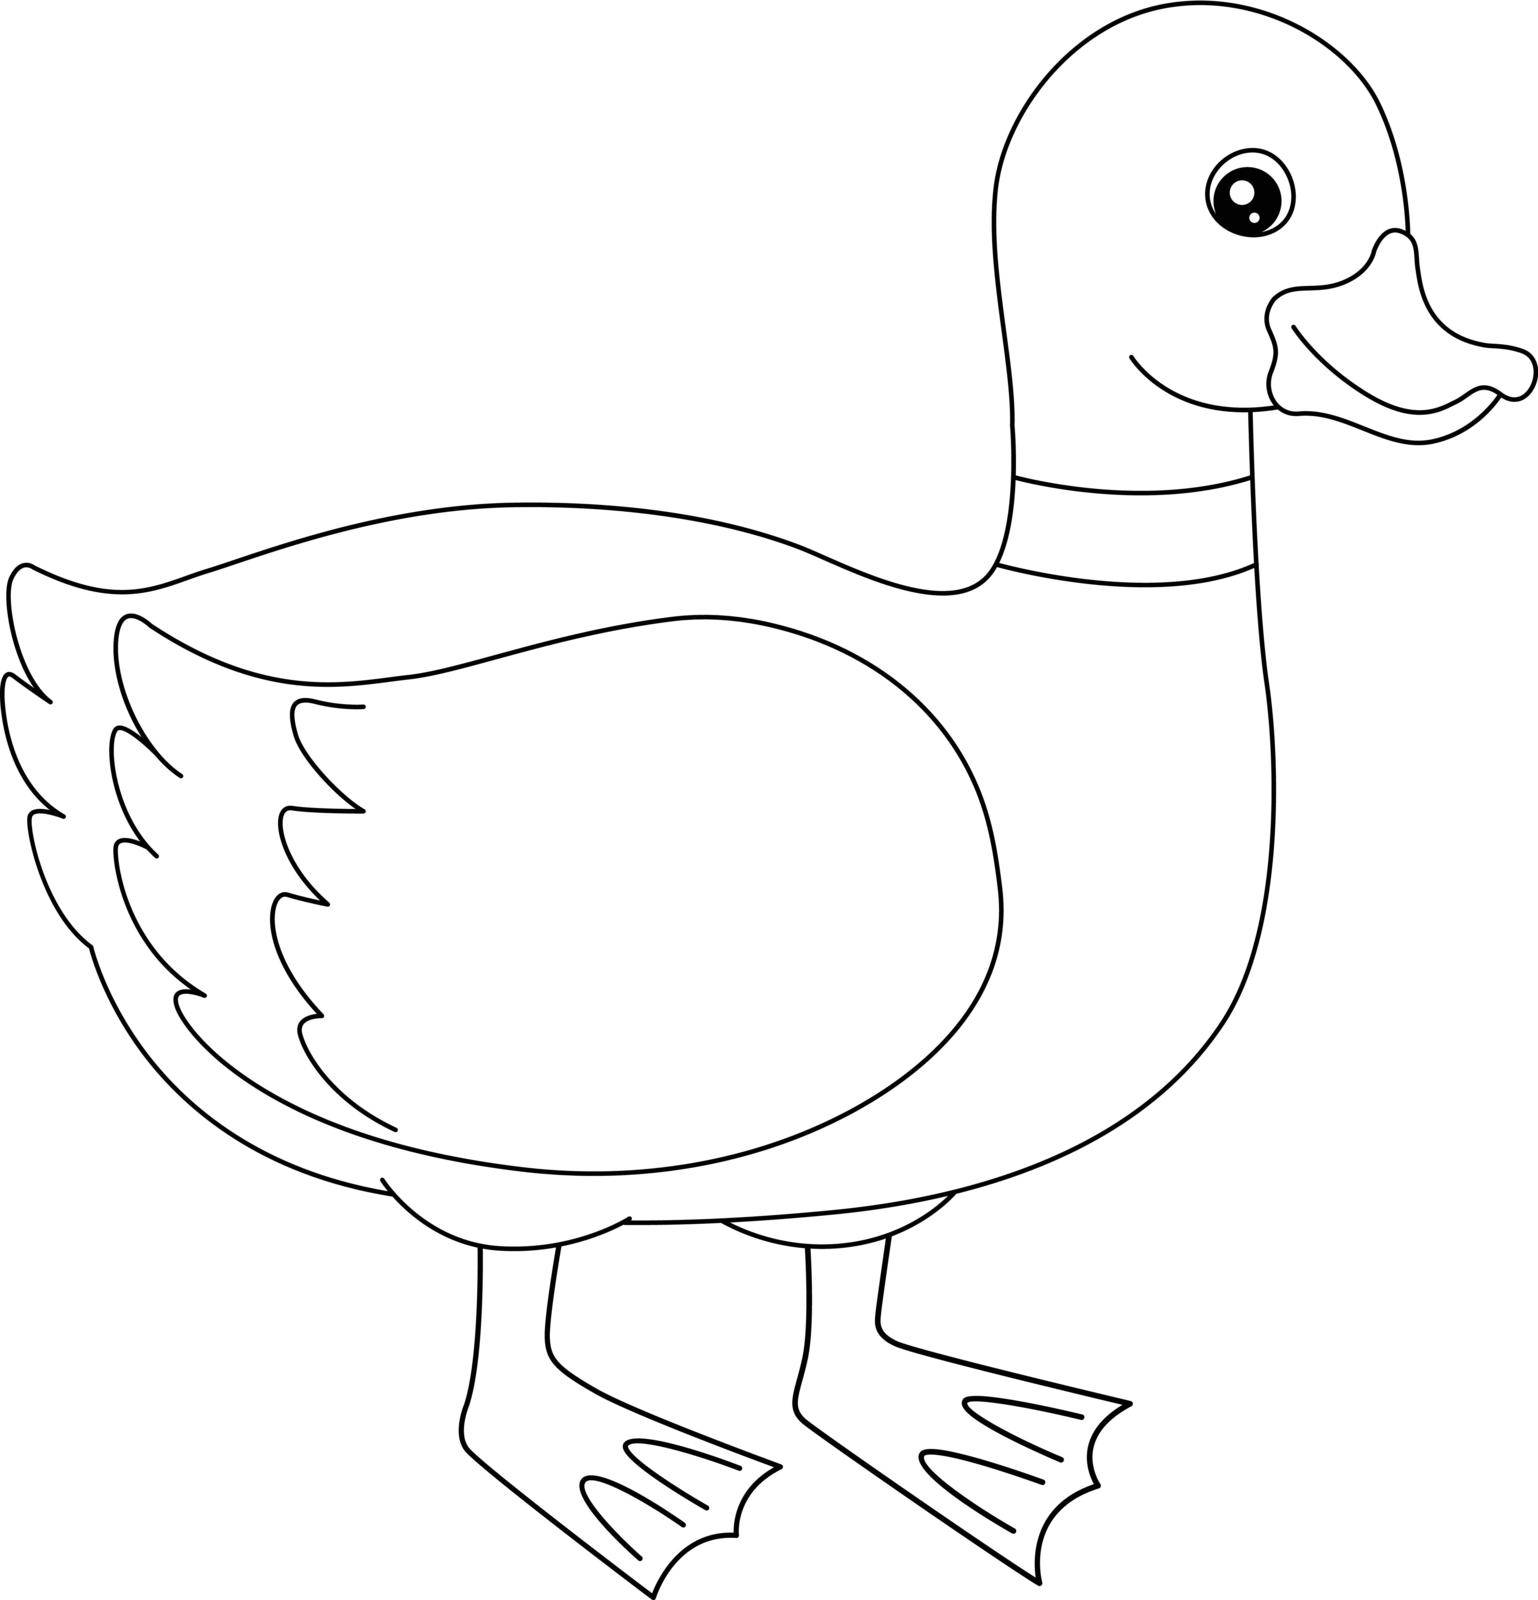 A cute and funny coloring page of a duck. Provides hours of coloring fun for children. To color, this page is very easy. Suitable for little kids and toddlers.